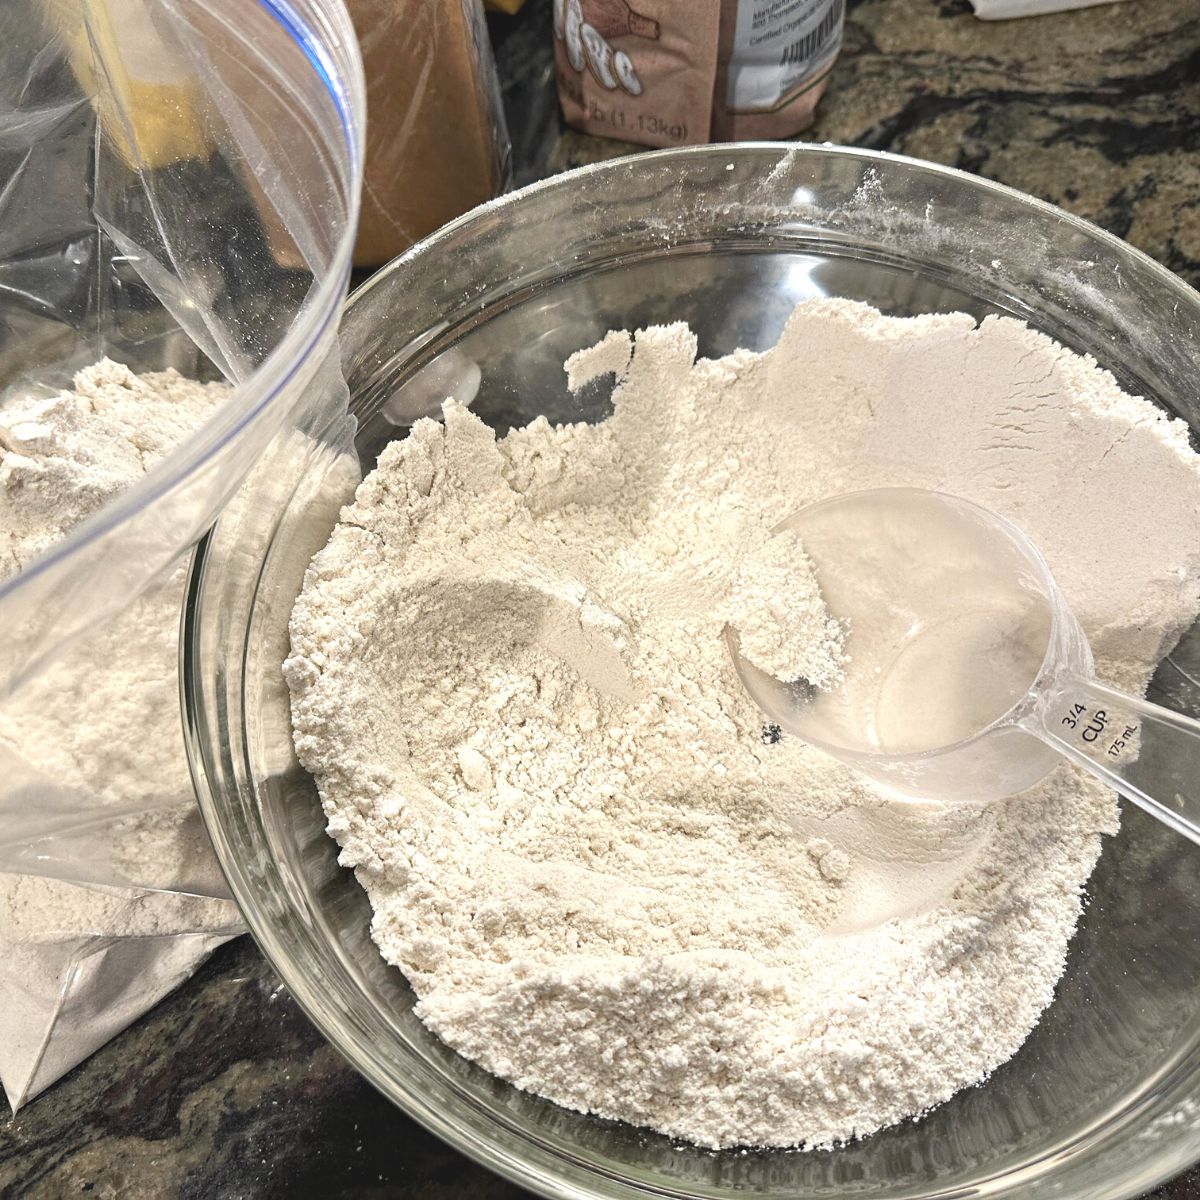 Mixed gluten free flour in a bowl. It has a plastic measuring scoop in the bowl.